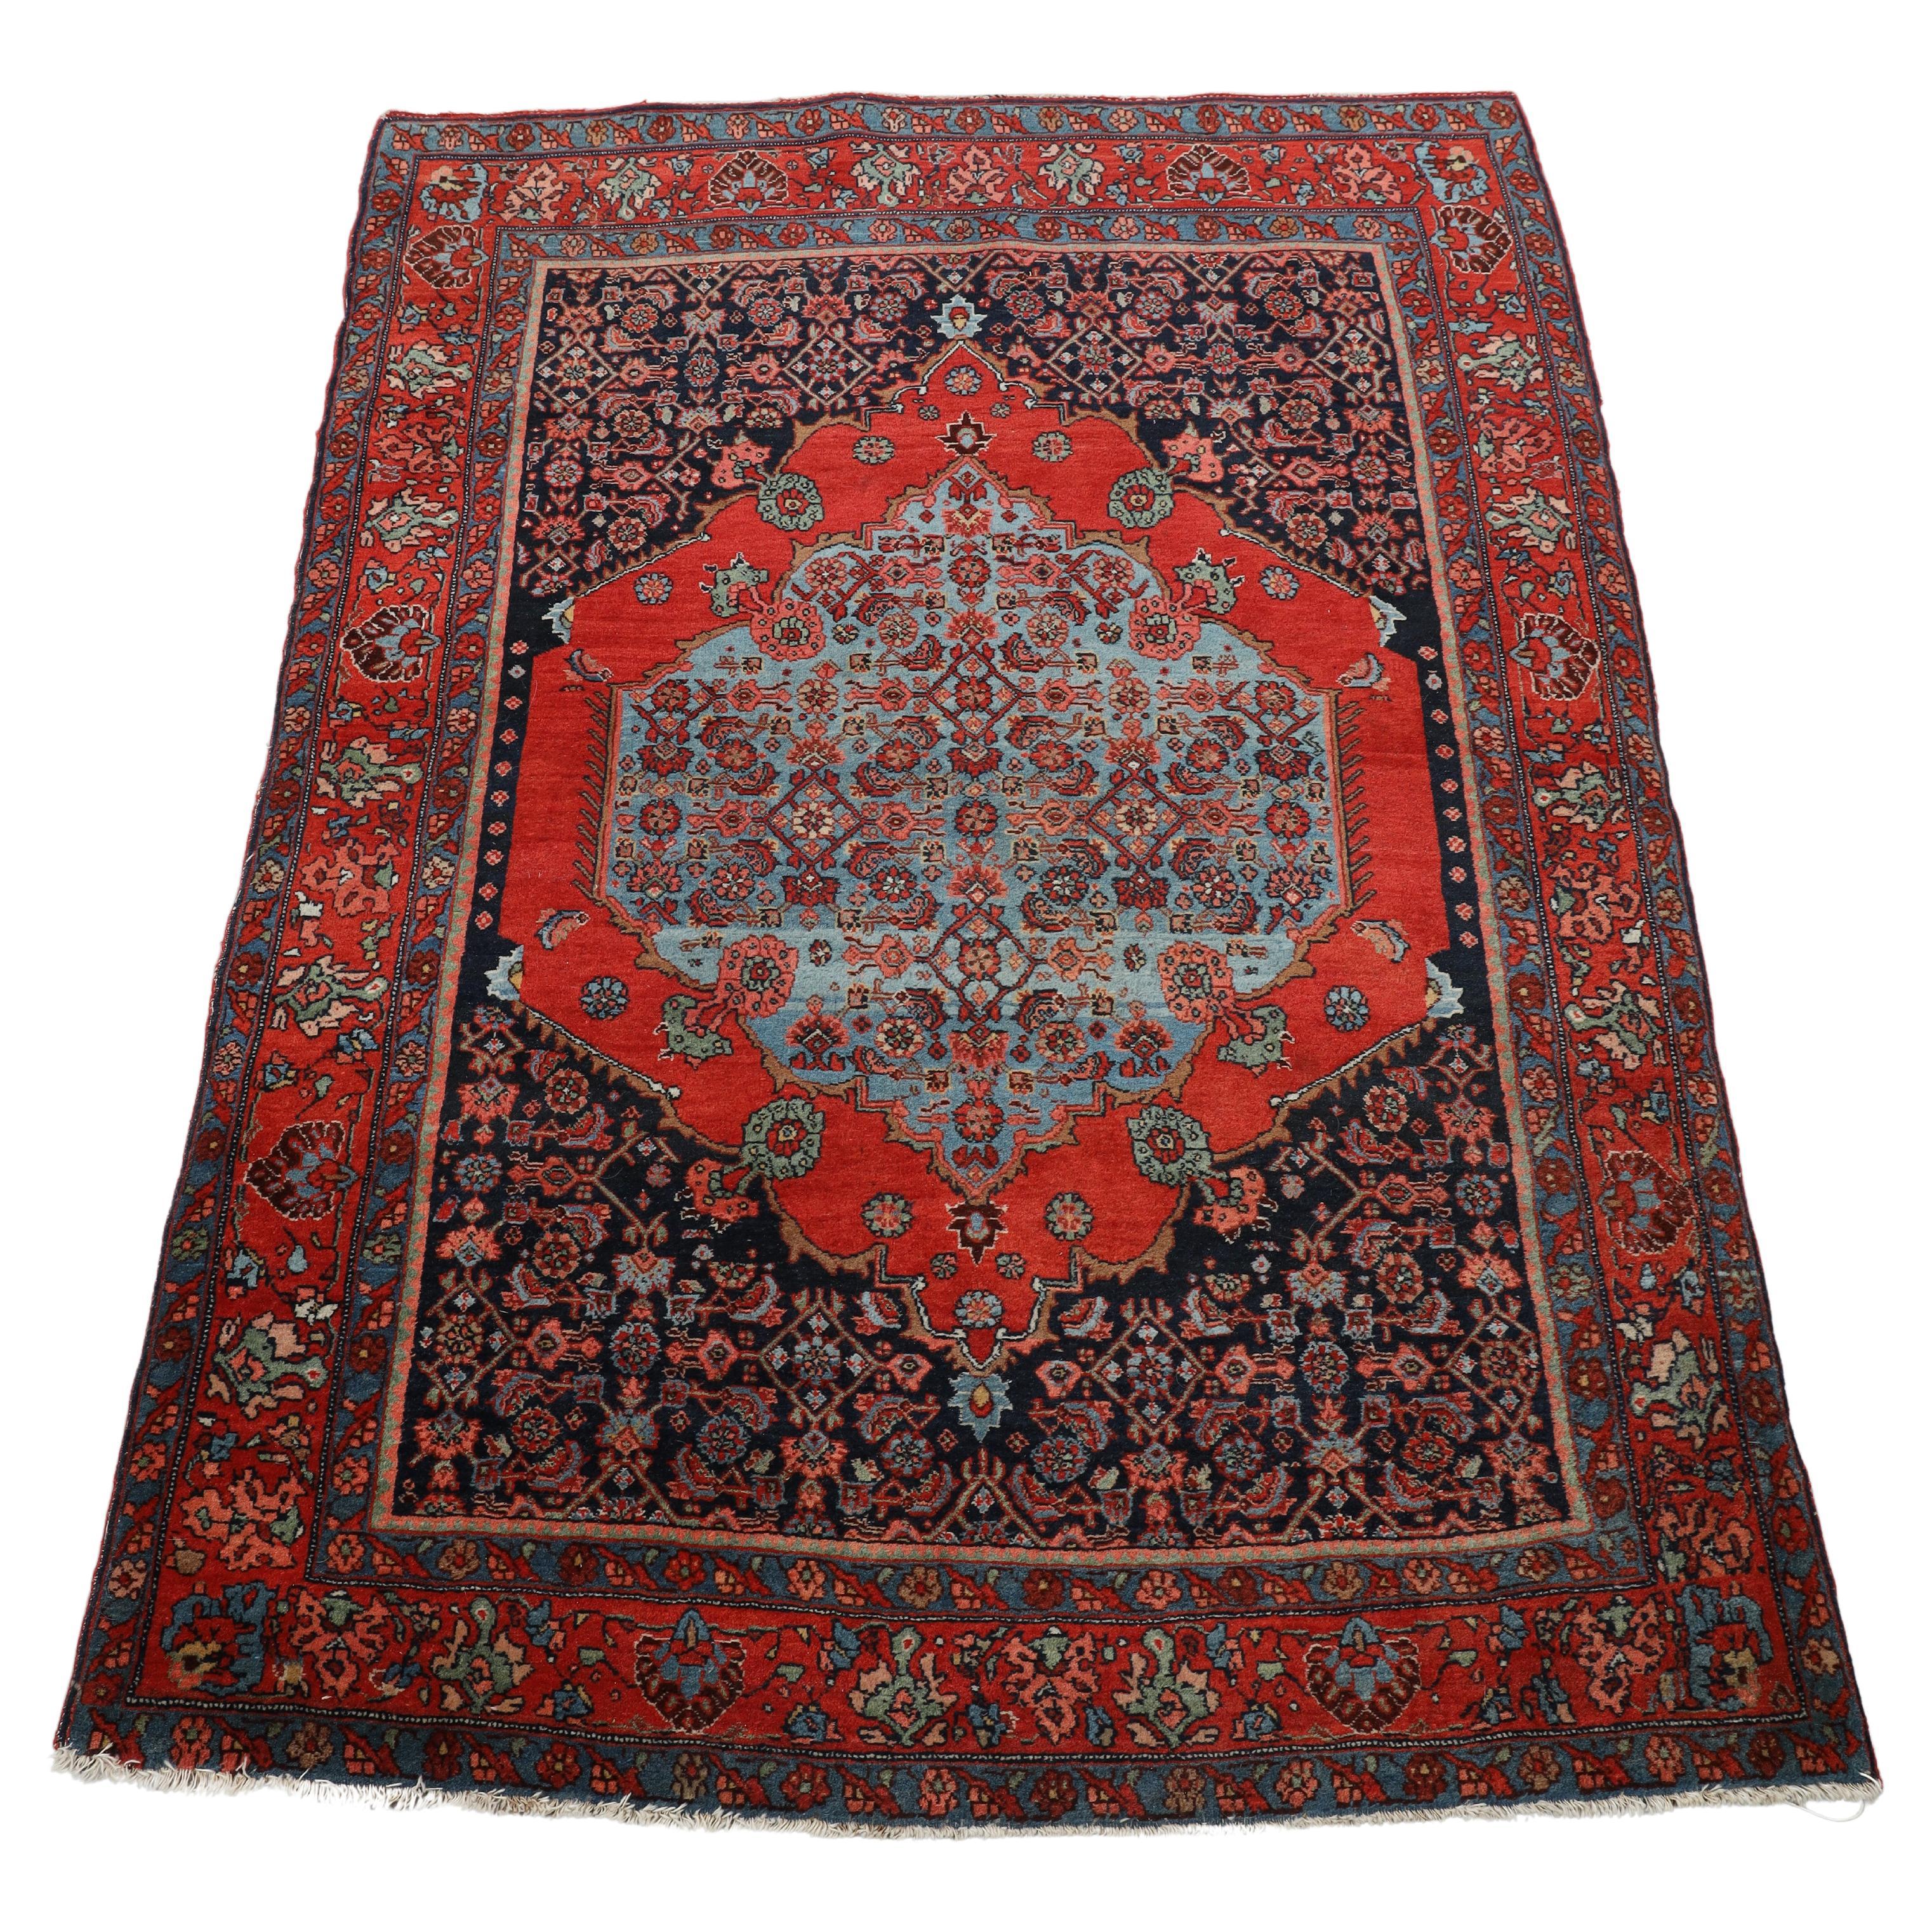 Red Carpet Medallion Hand Woven Wool Area Rug Traditional Floral Rust Carpet For Sale